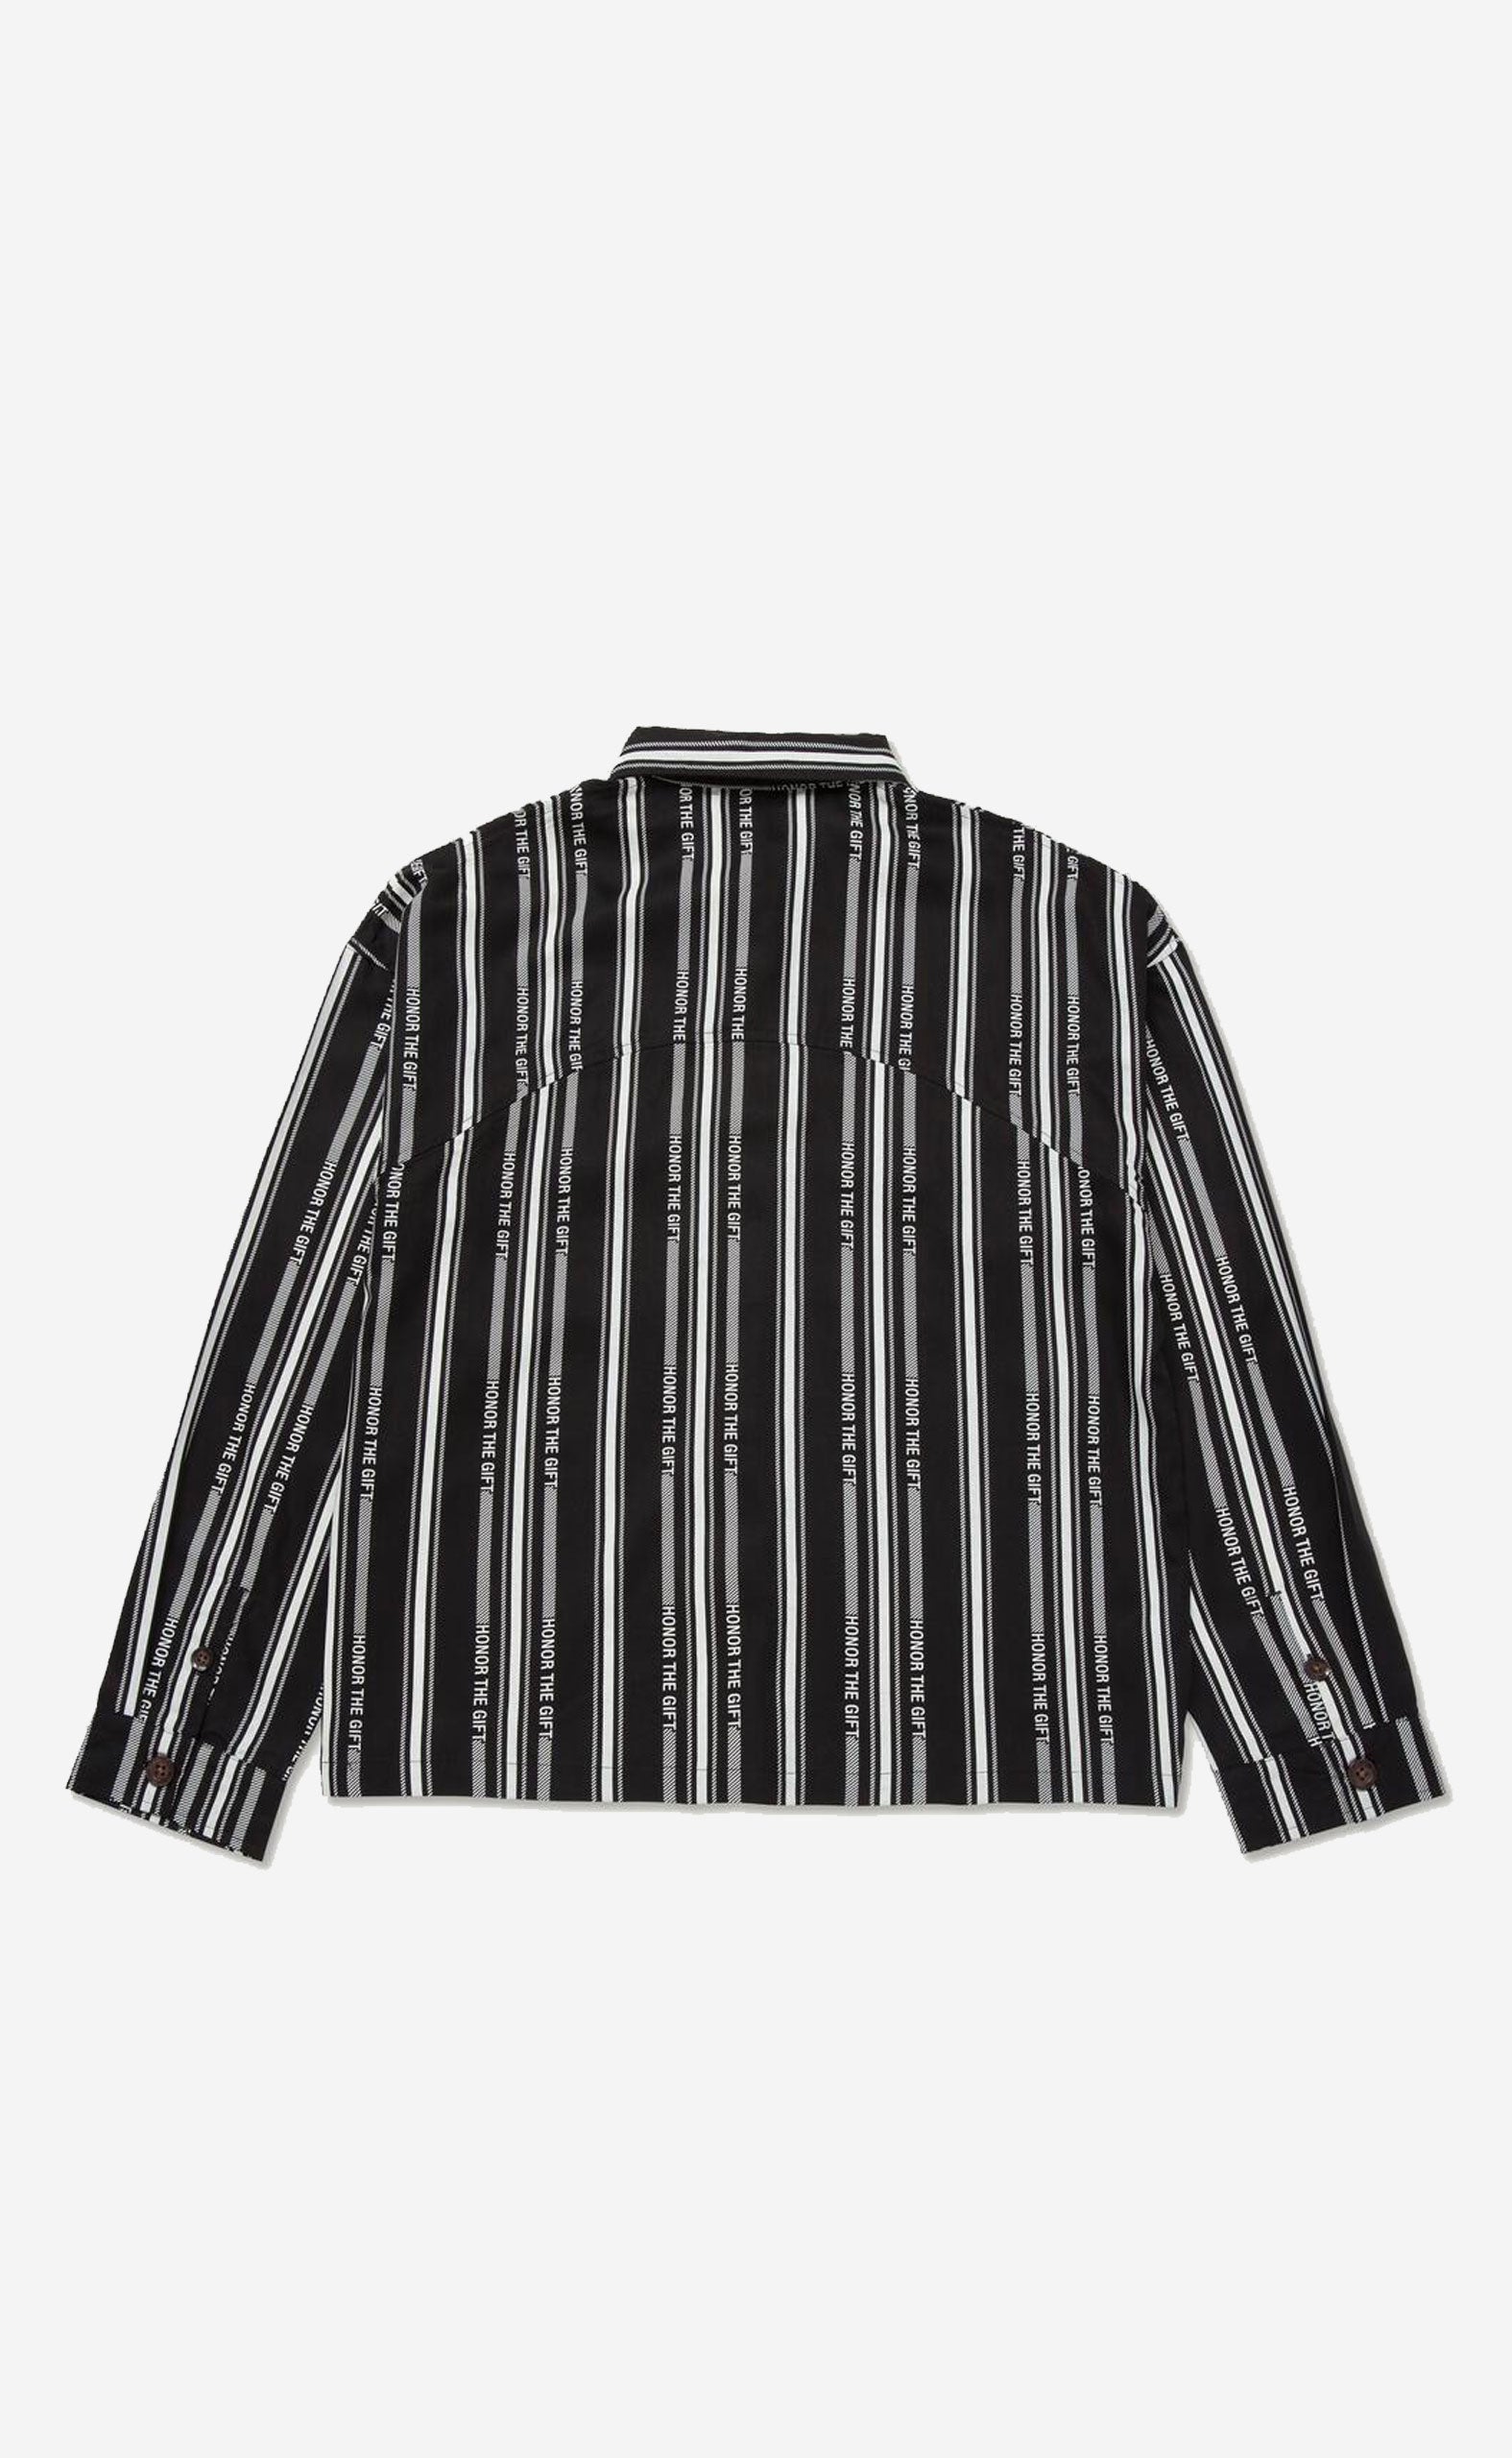 BLACK C-FALL HONOR STRIPE BUTTON UP